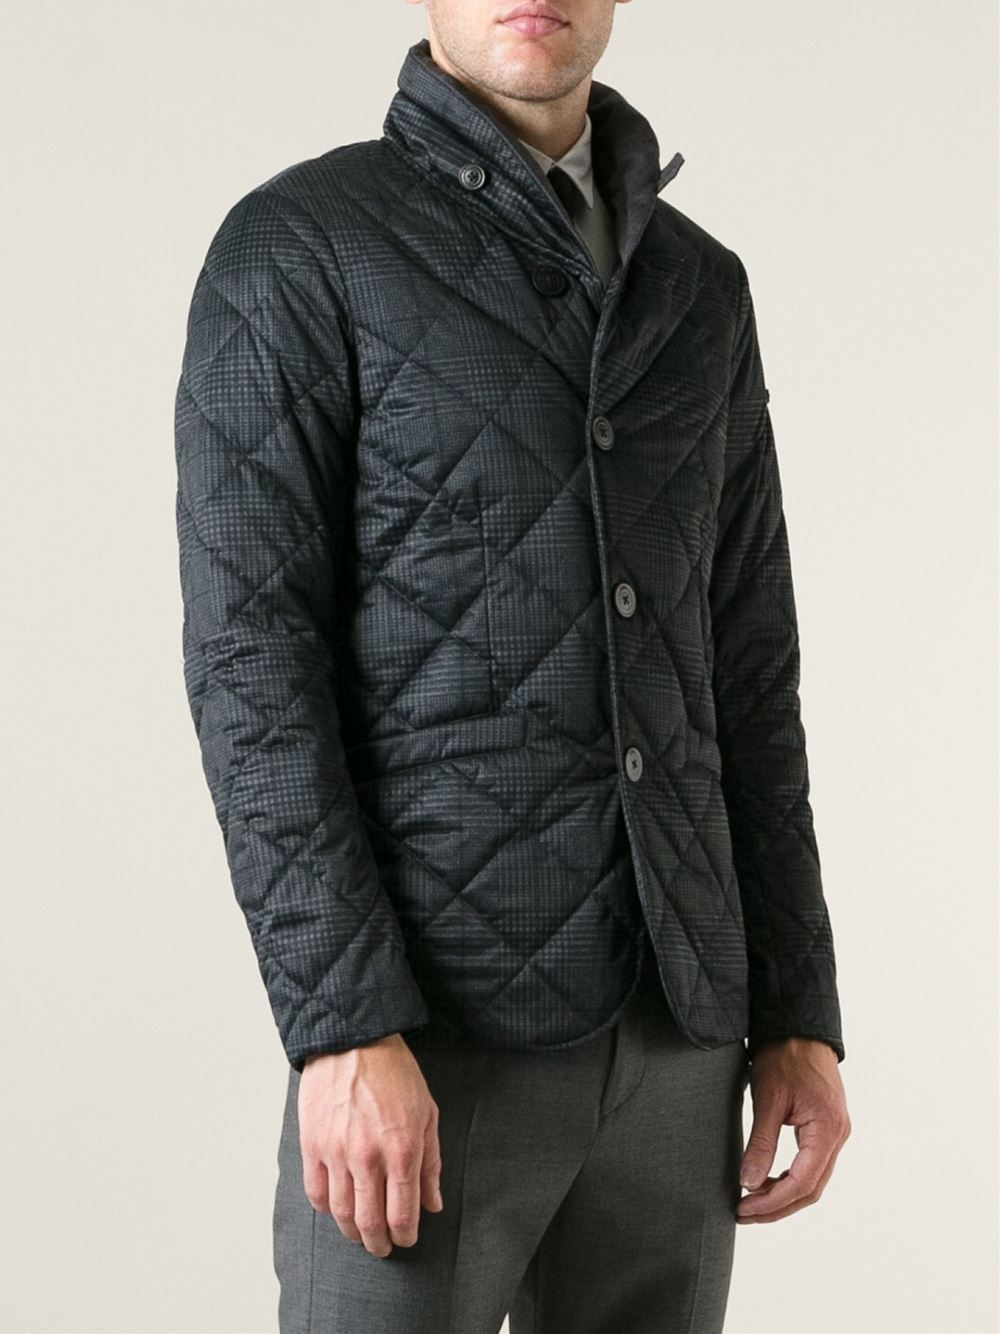 Lyst - Emporio Armani Quilted Button Down Jacket in Gray for Men